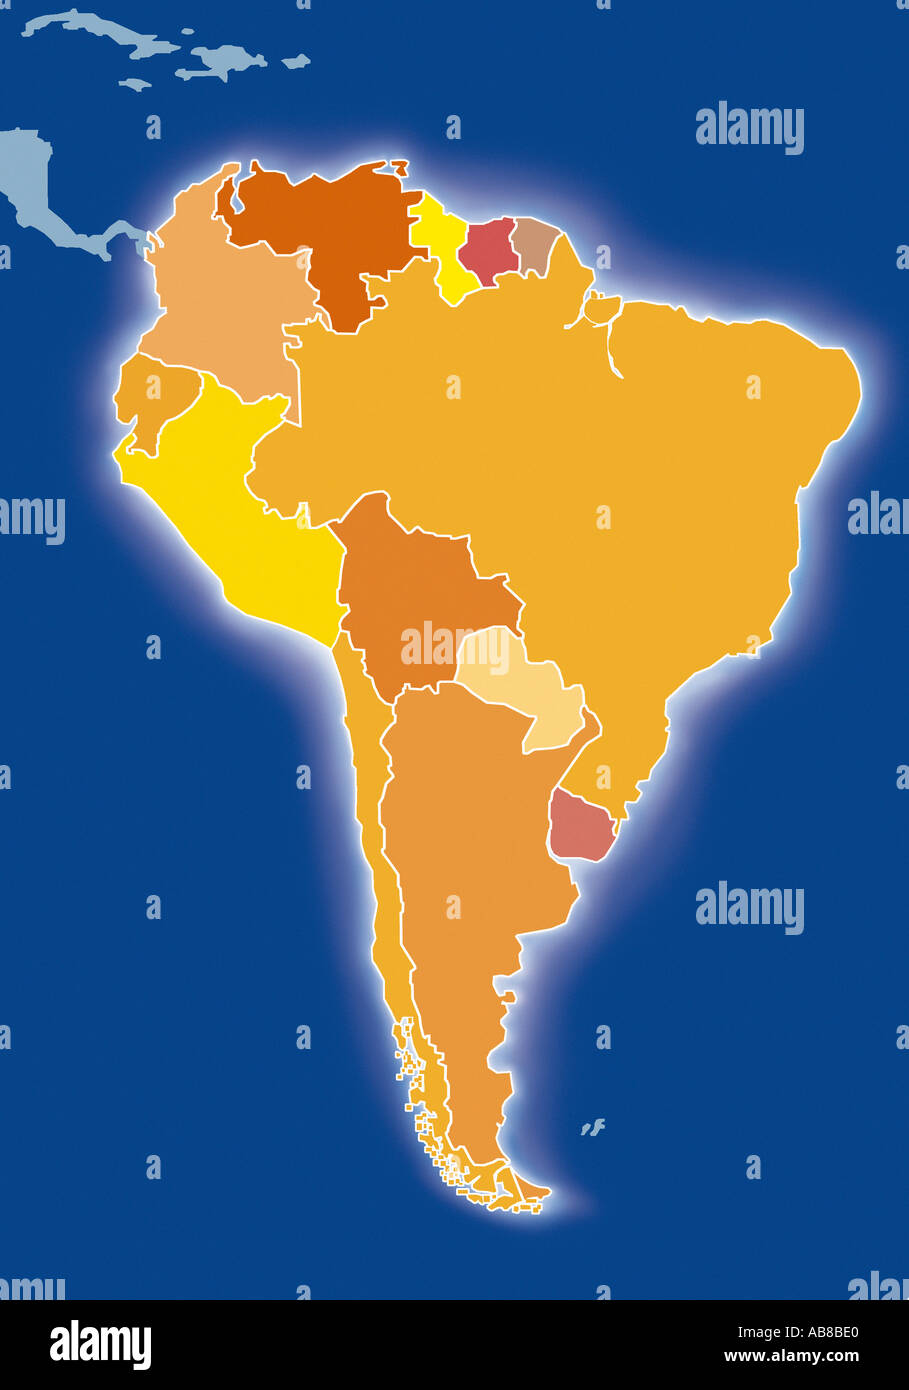 Map of South America Stock Photo